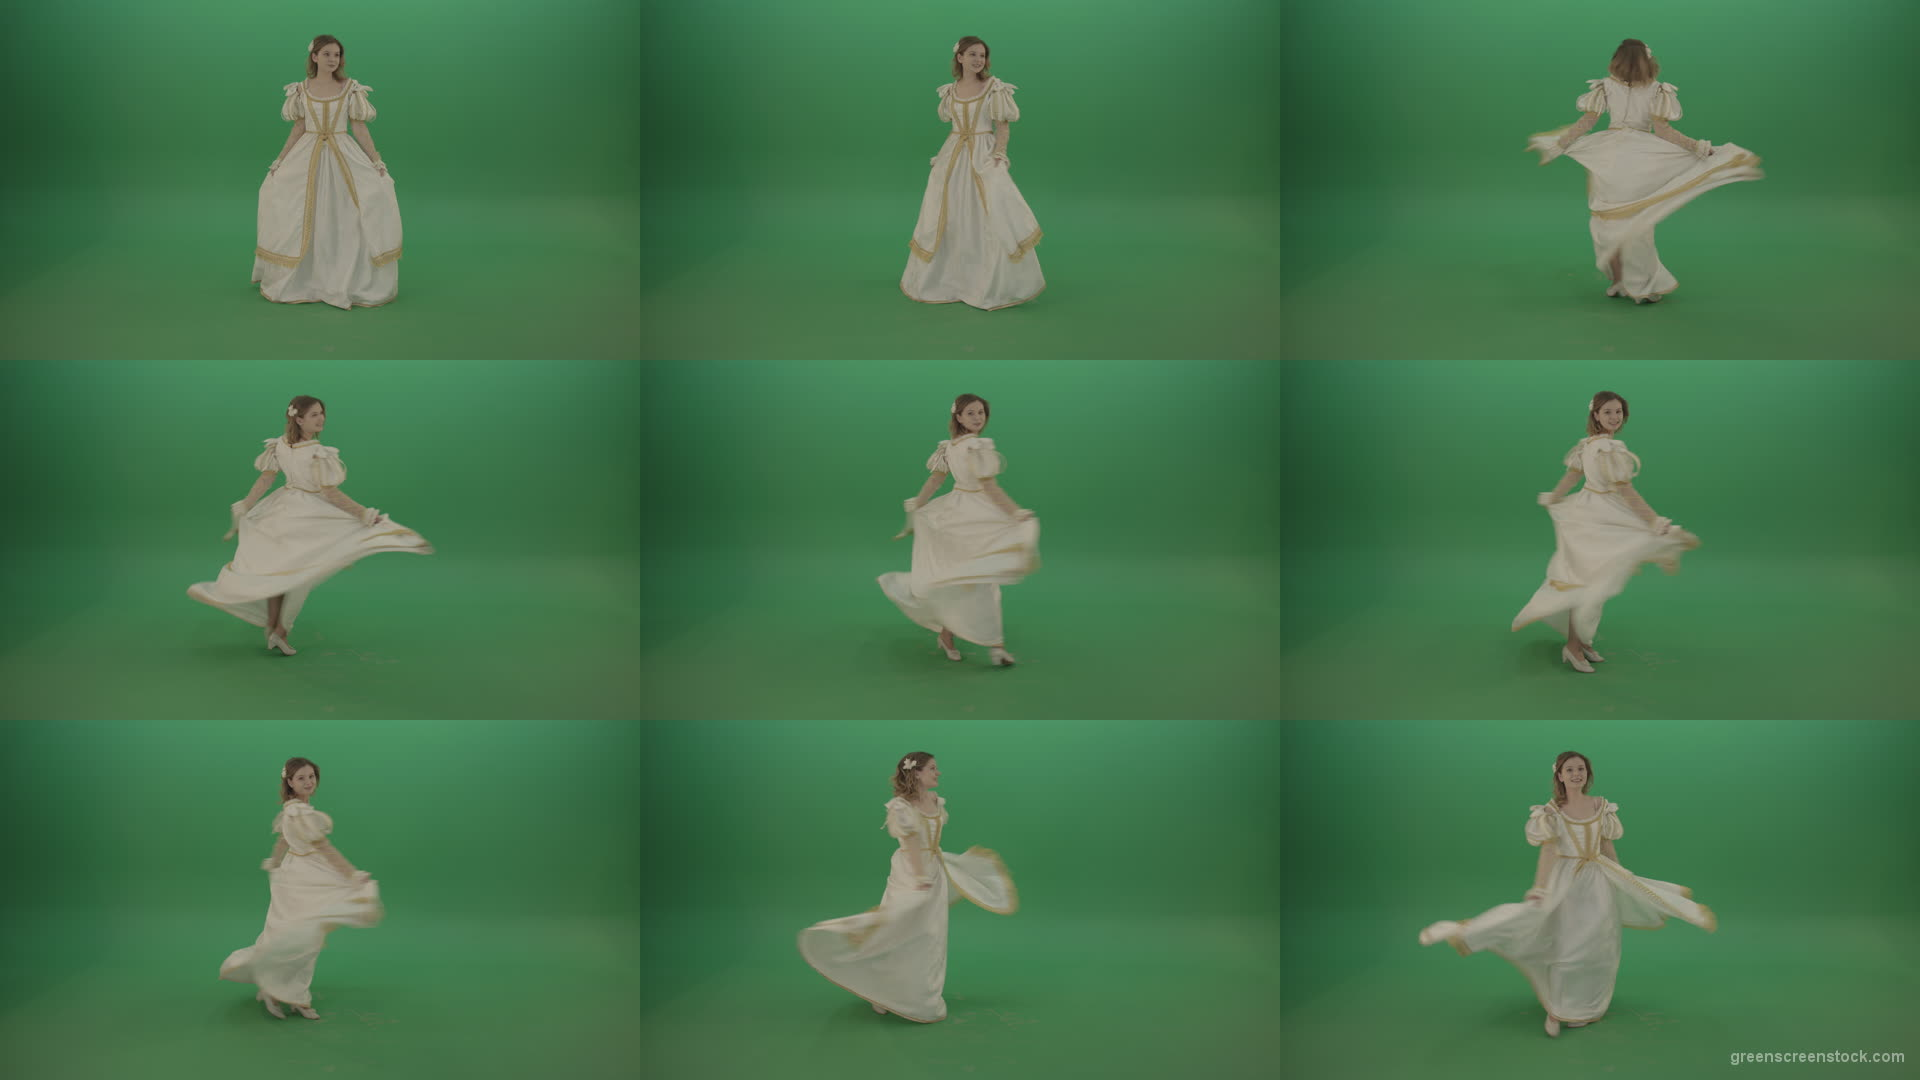 Princess-dances-twisting-around-the-circle-isolated-on-chromakey-background Green Screen Stock